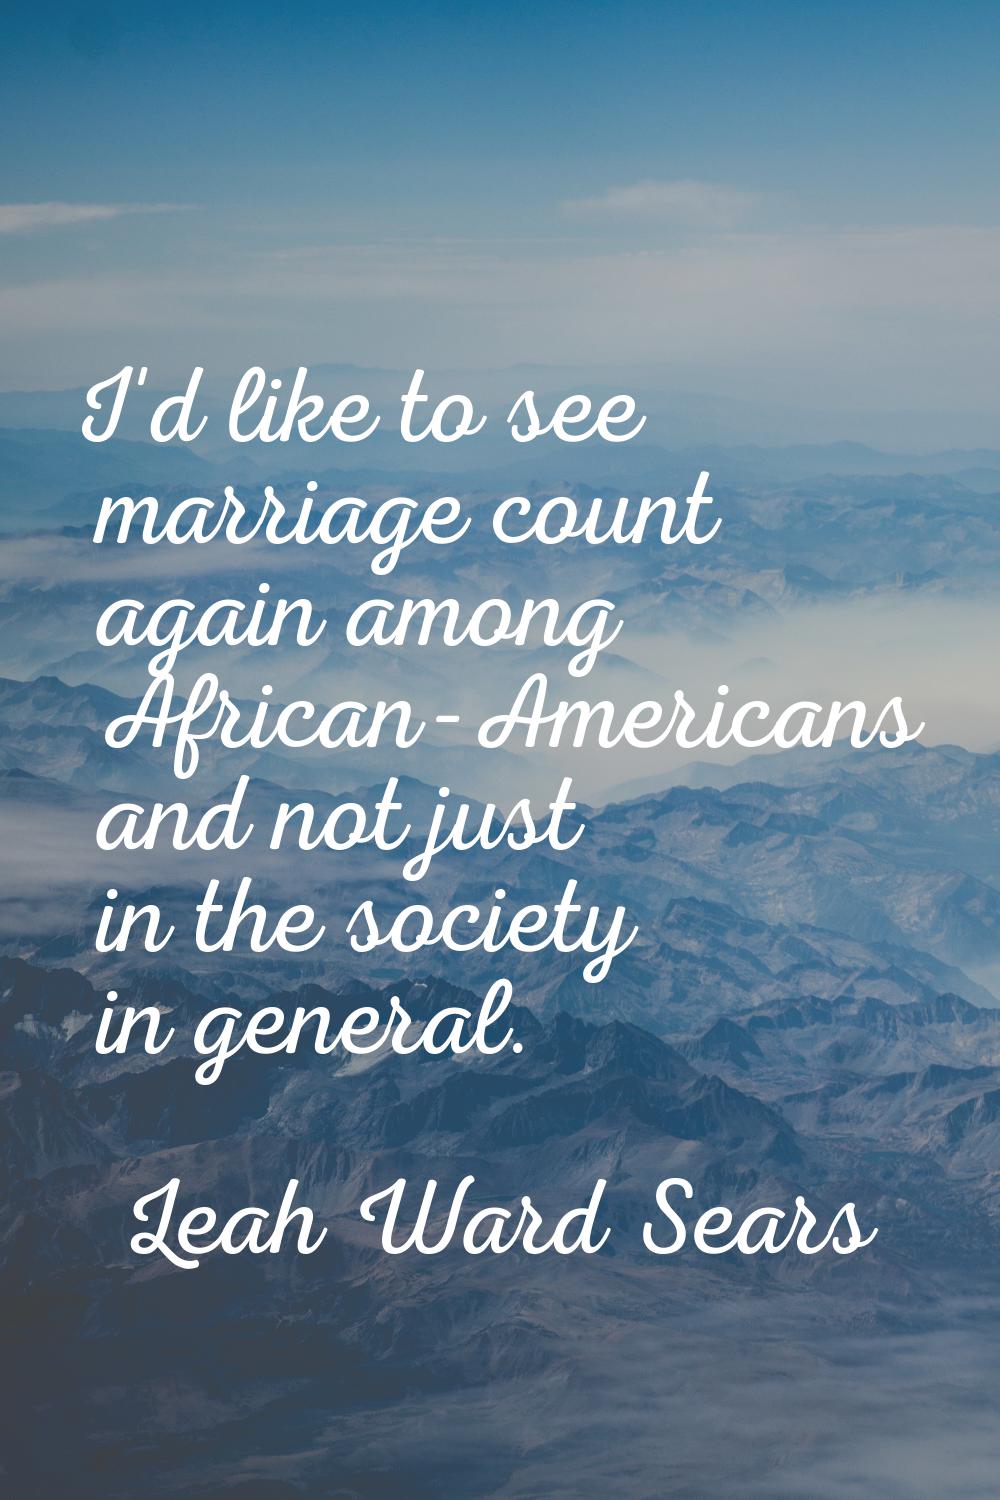 I'd like to see marriage count again among African-Americans and not just in the society in general